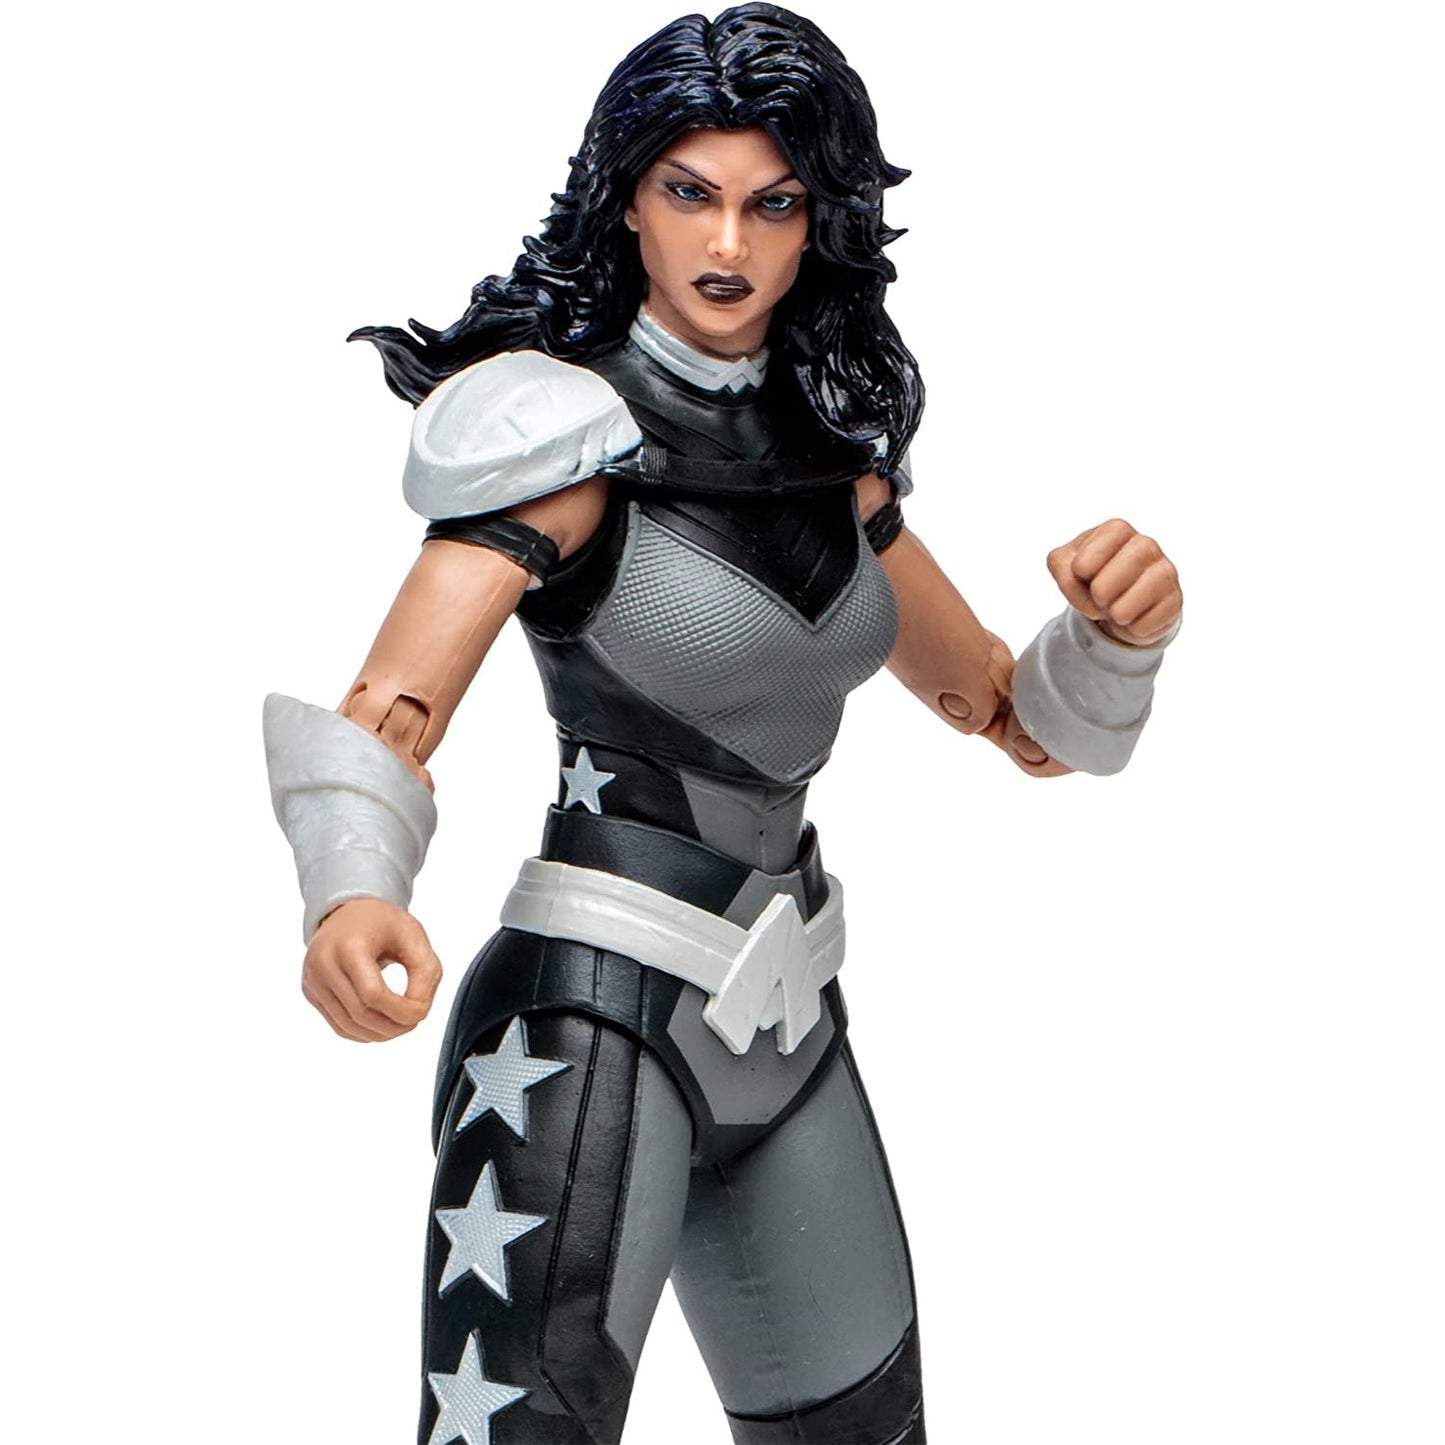 DC Multiverse Donna Troy (Titans) 7in Build-A Figure Action Figure Toy